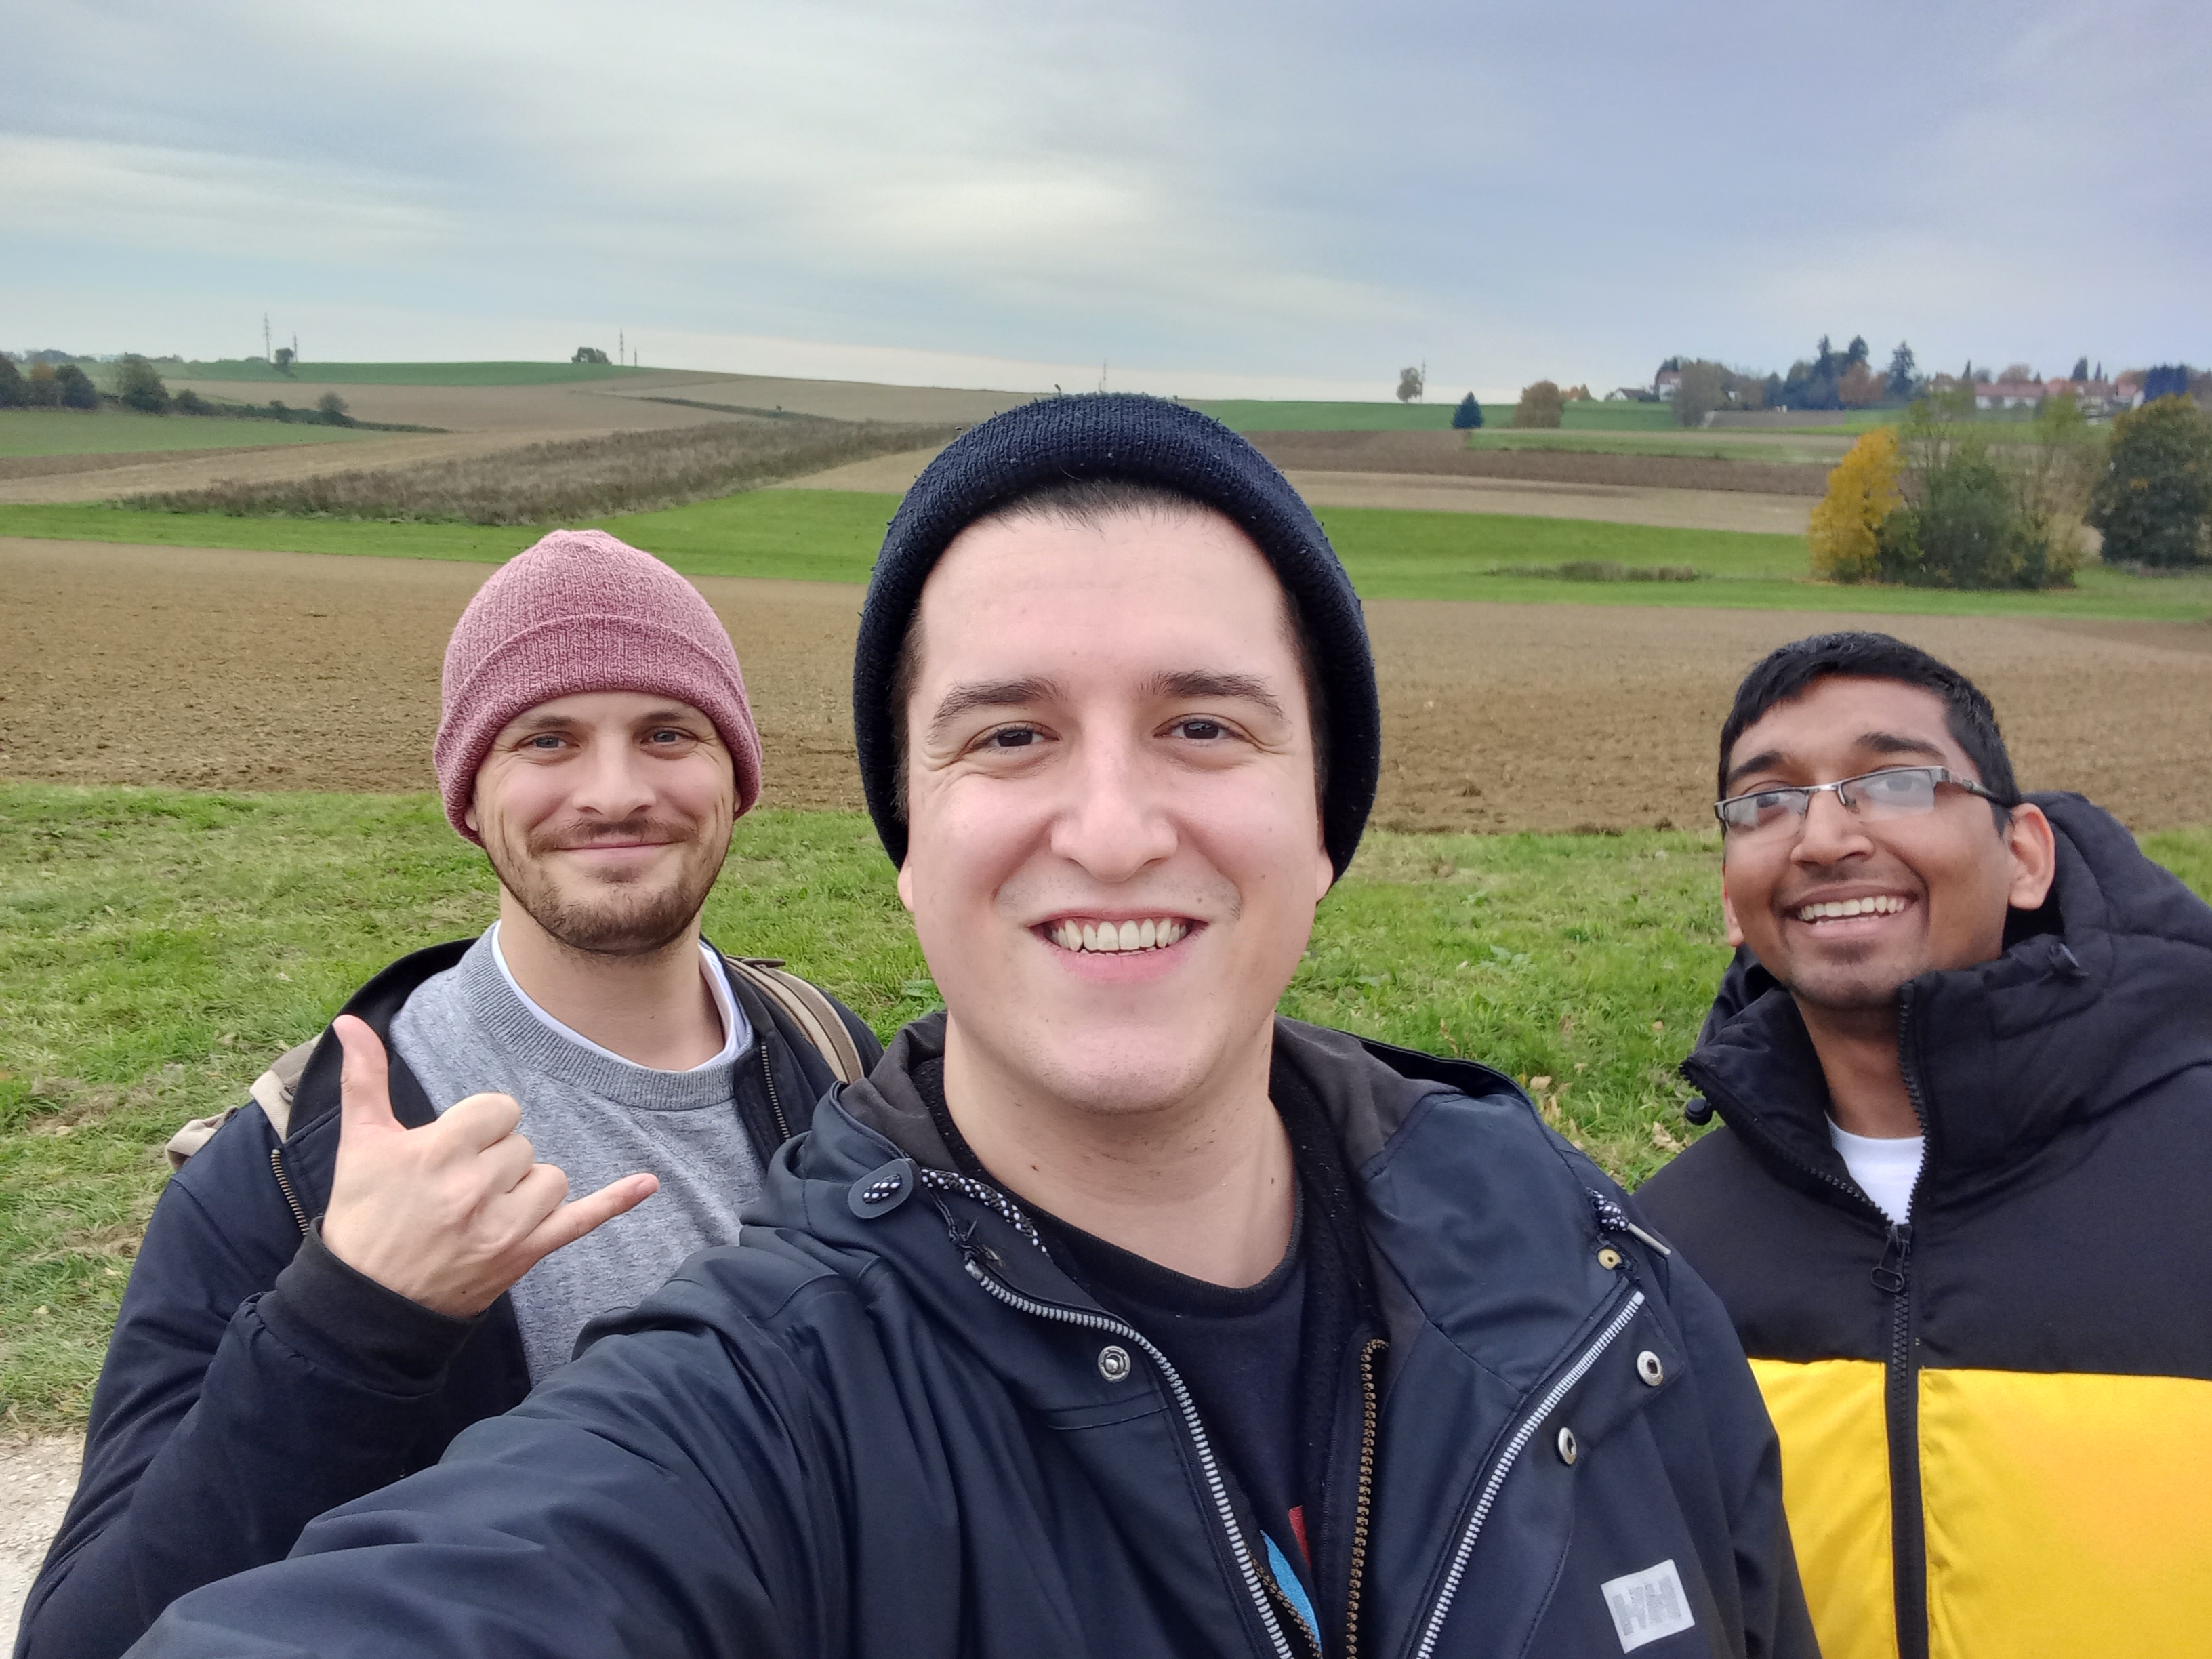 The three young founders of “RAISE Agriculture” (from left to right): Magnus Baumann, James Specker and Abir Bhattacharyya.